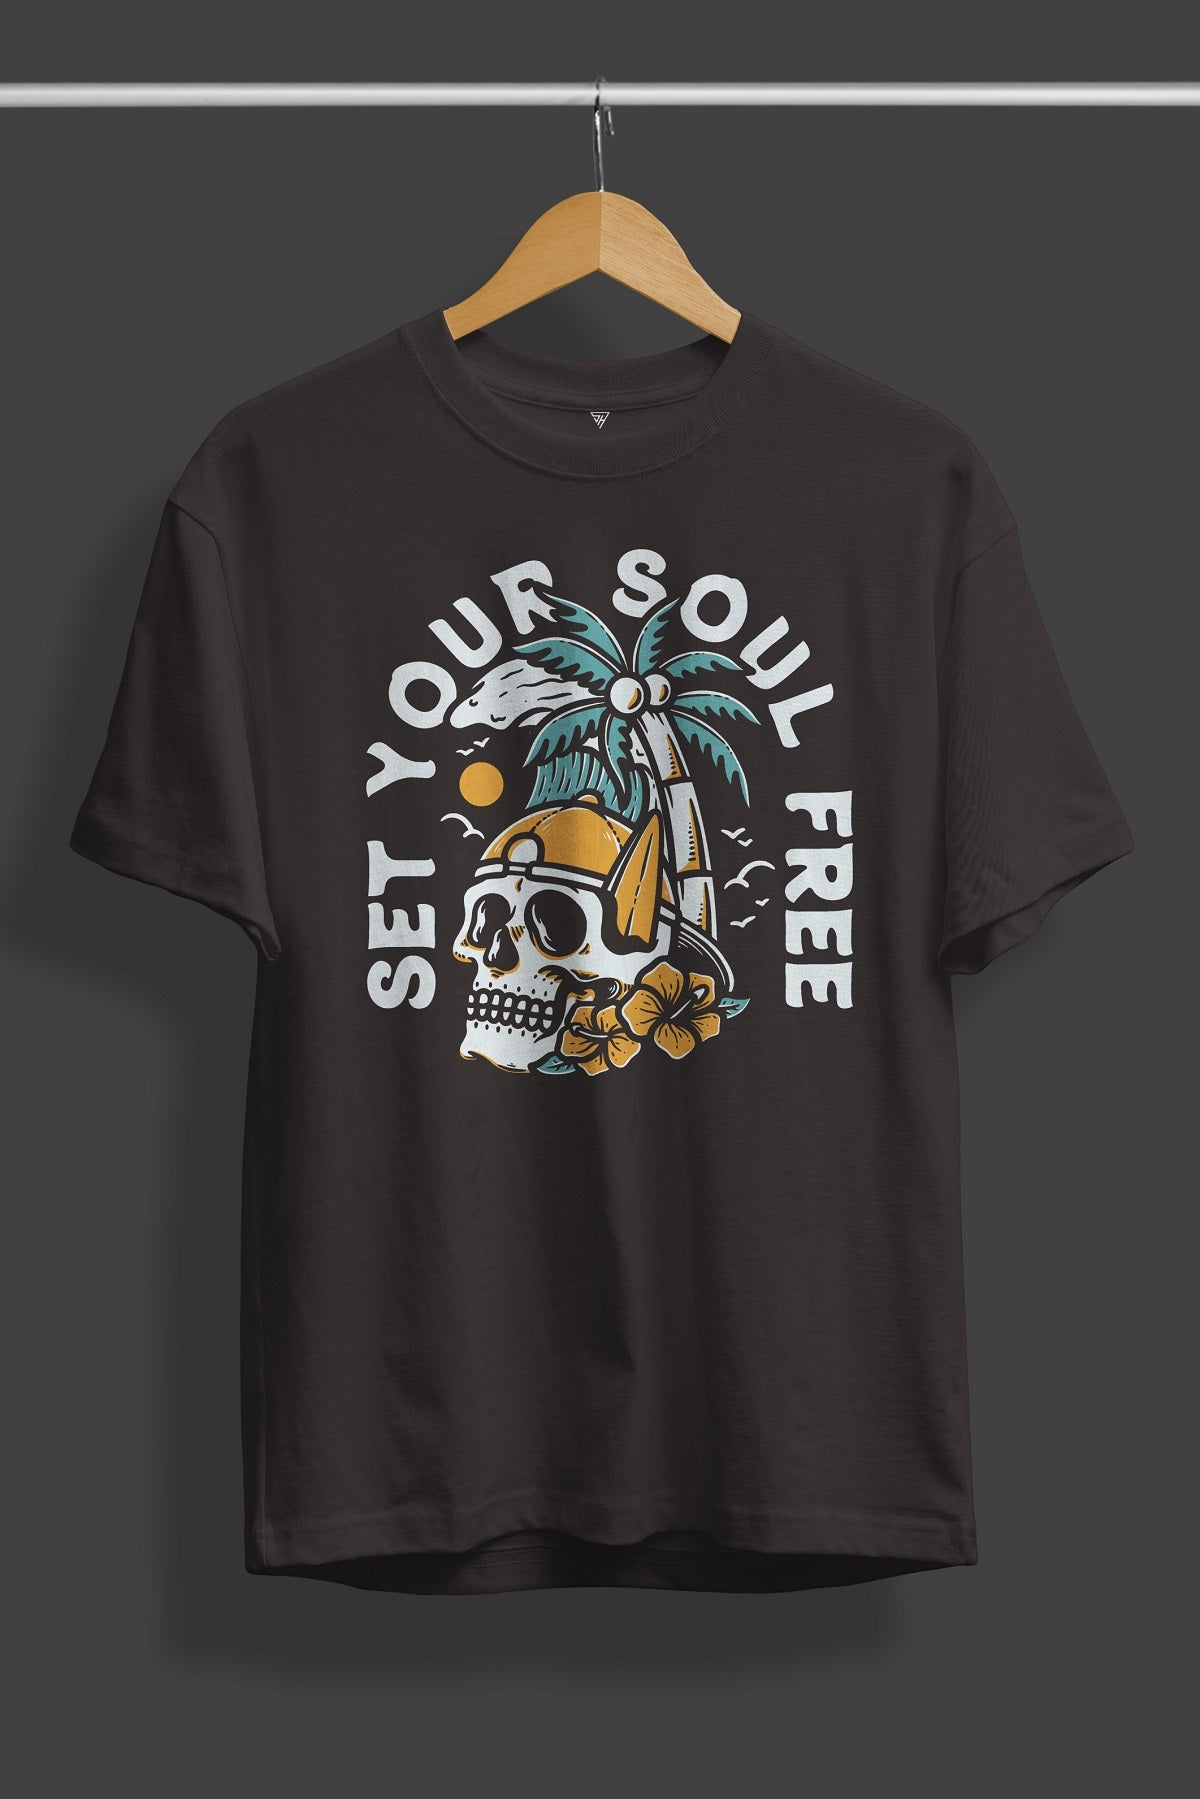 Set Your Soul Free Printed T-Shirt - SQUIREHOOD